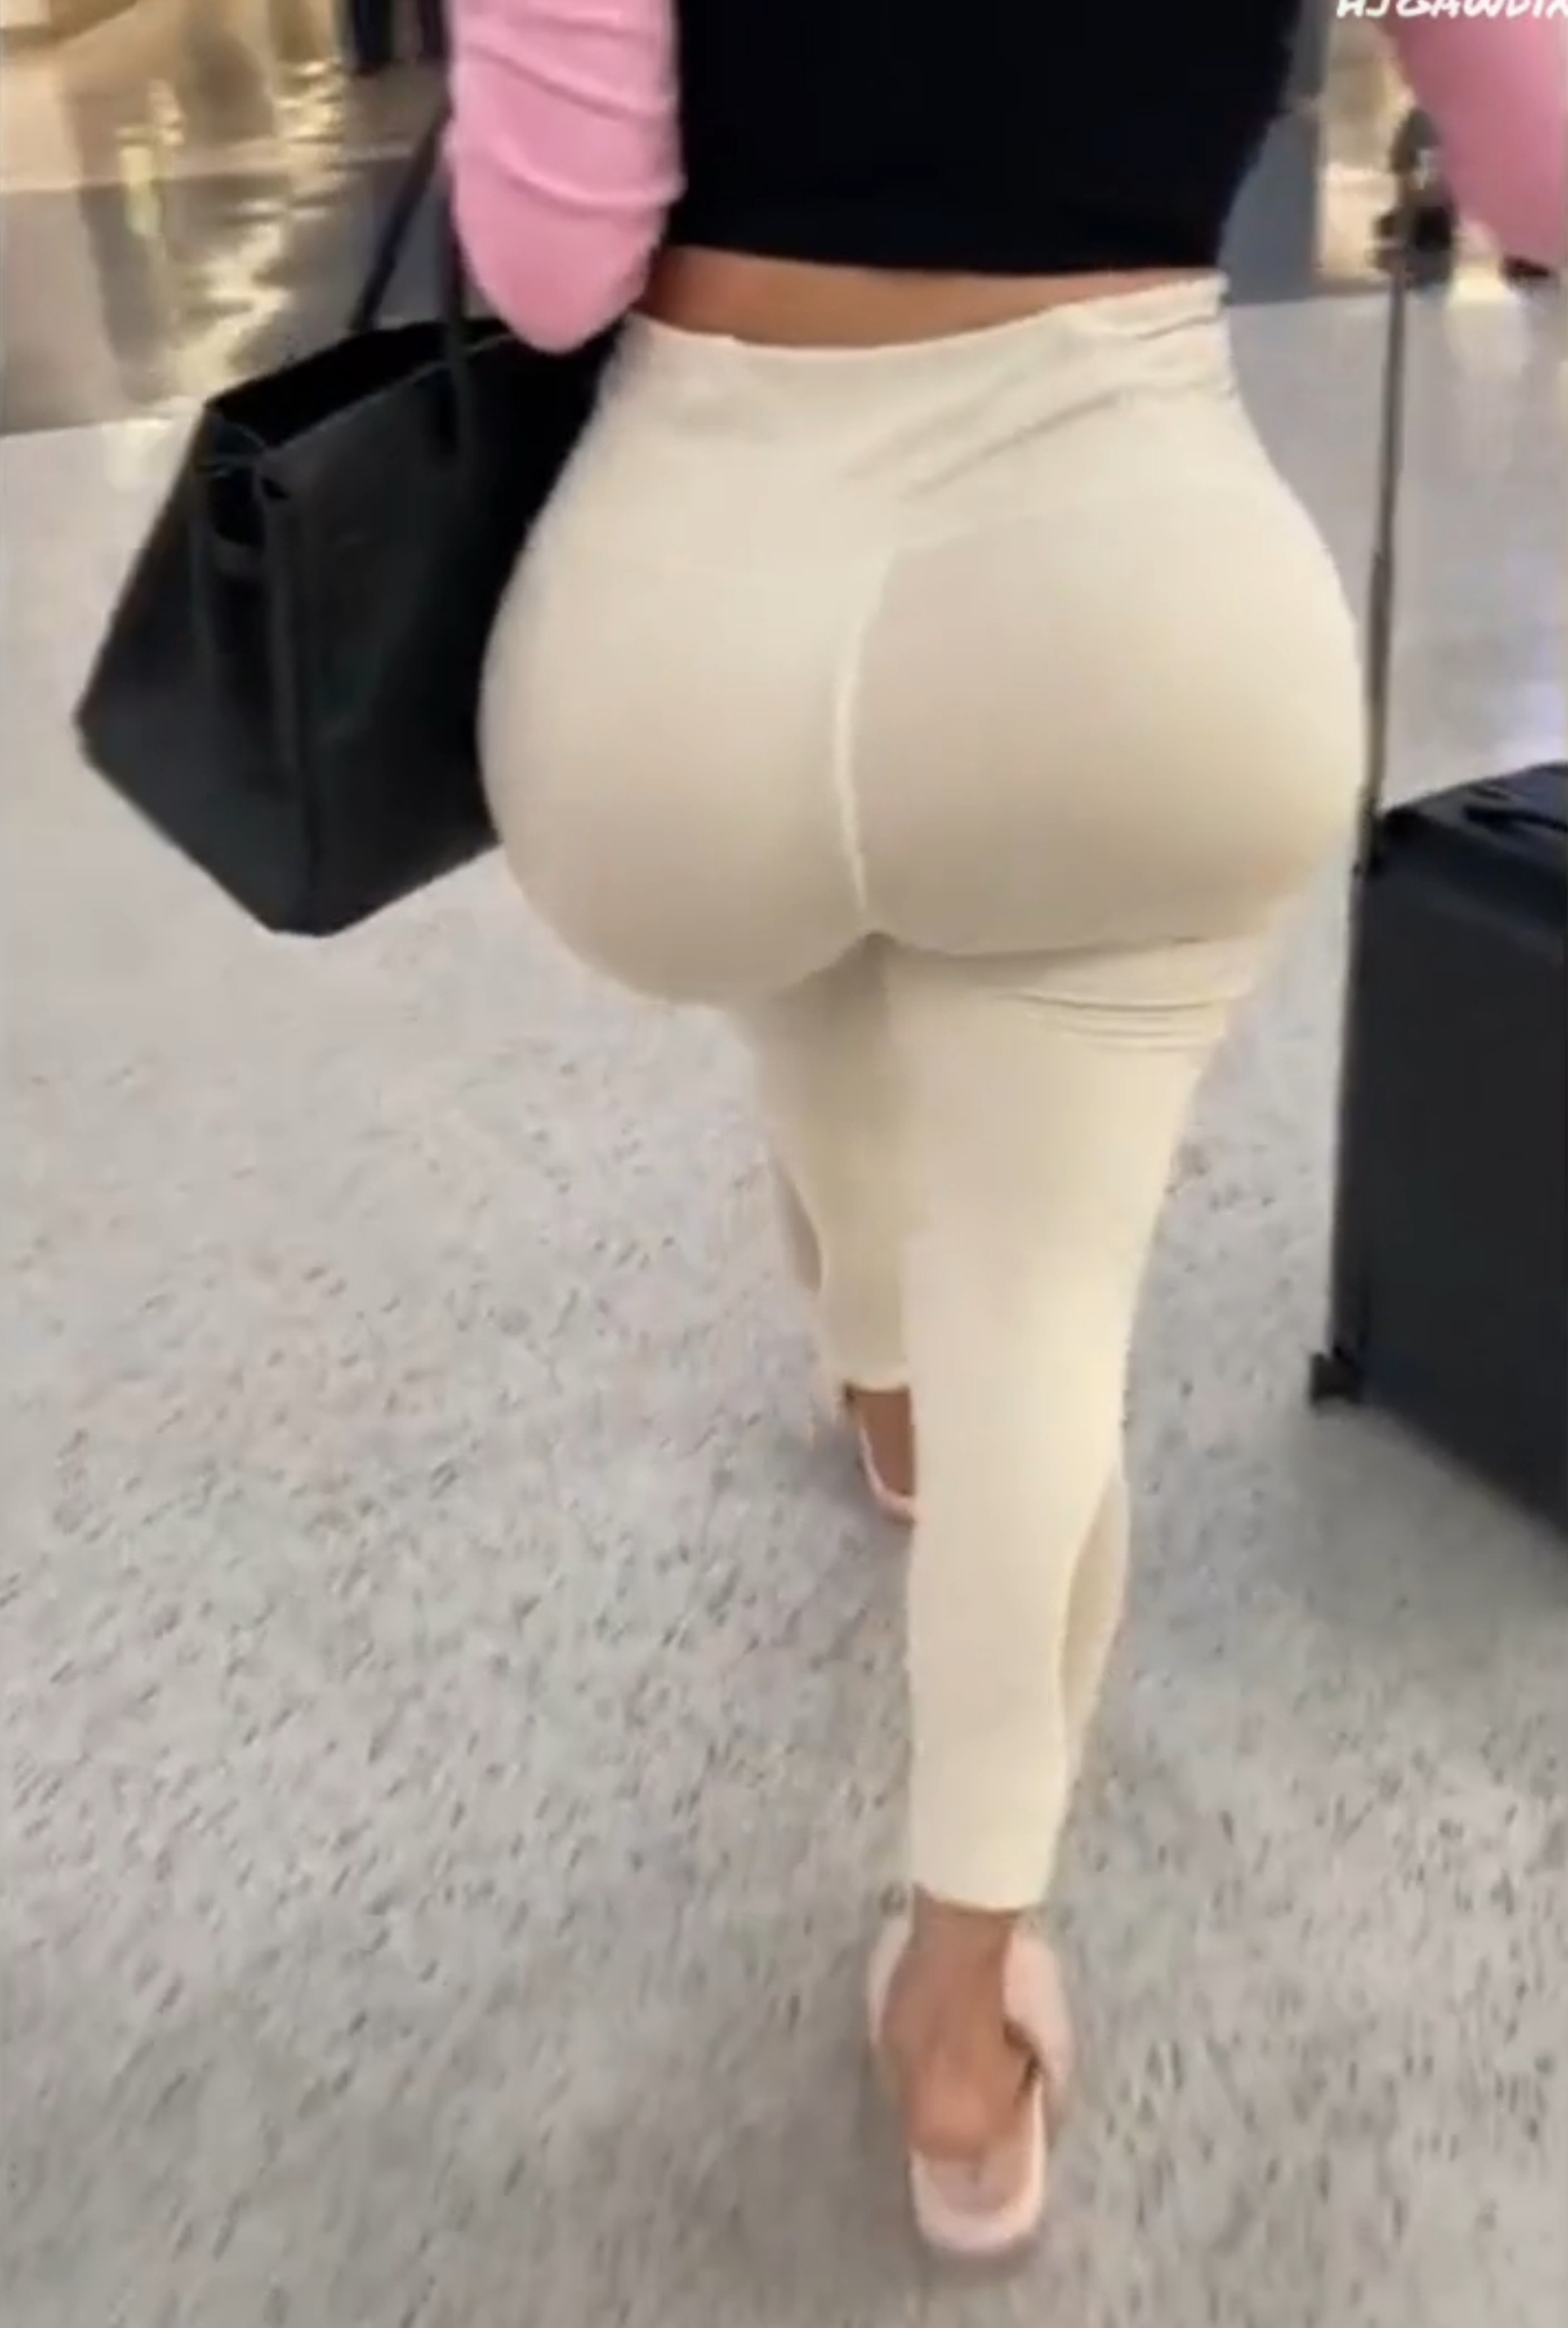 MEGA BUBBLE BOOTY WALKING AROUND WITH ALL THAT DAM ASS